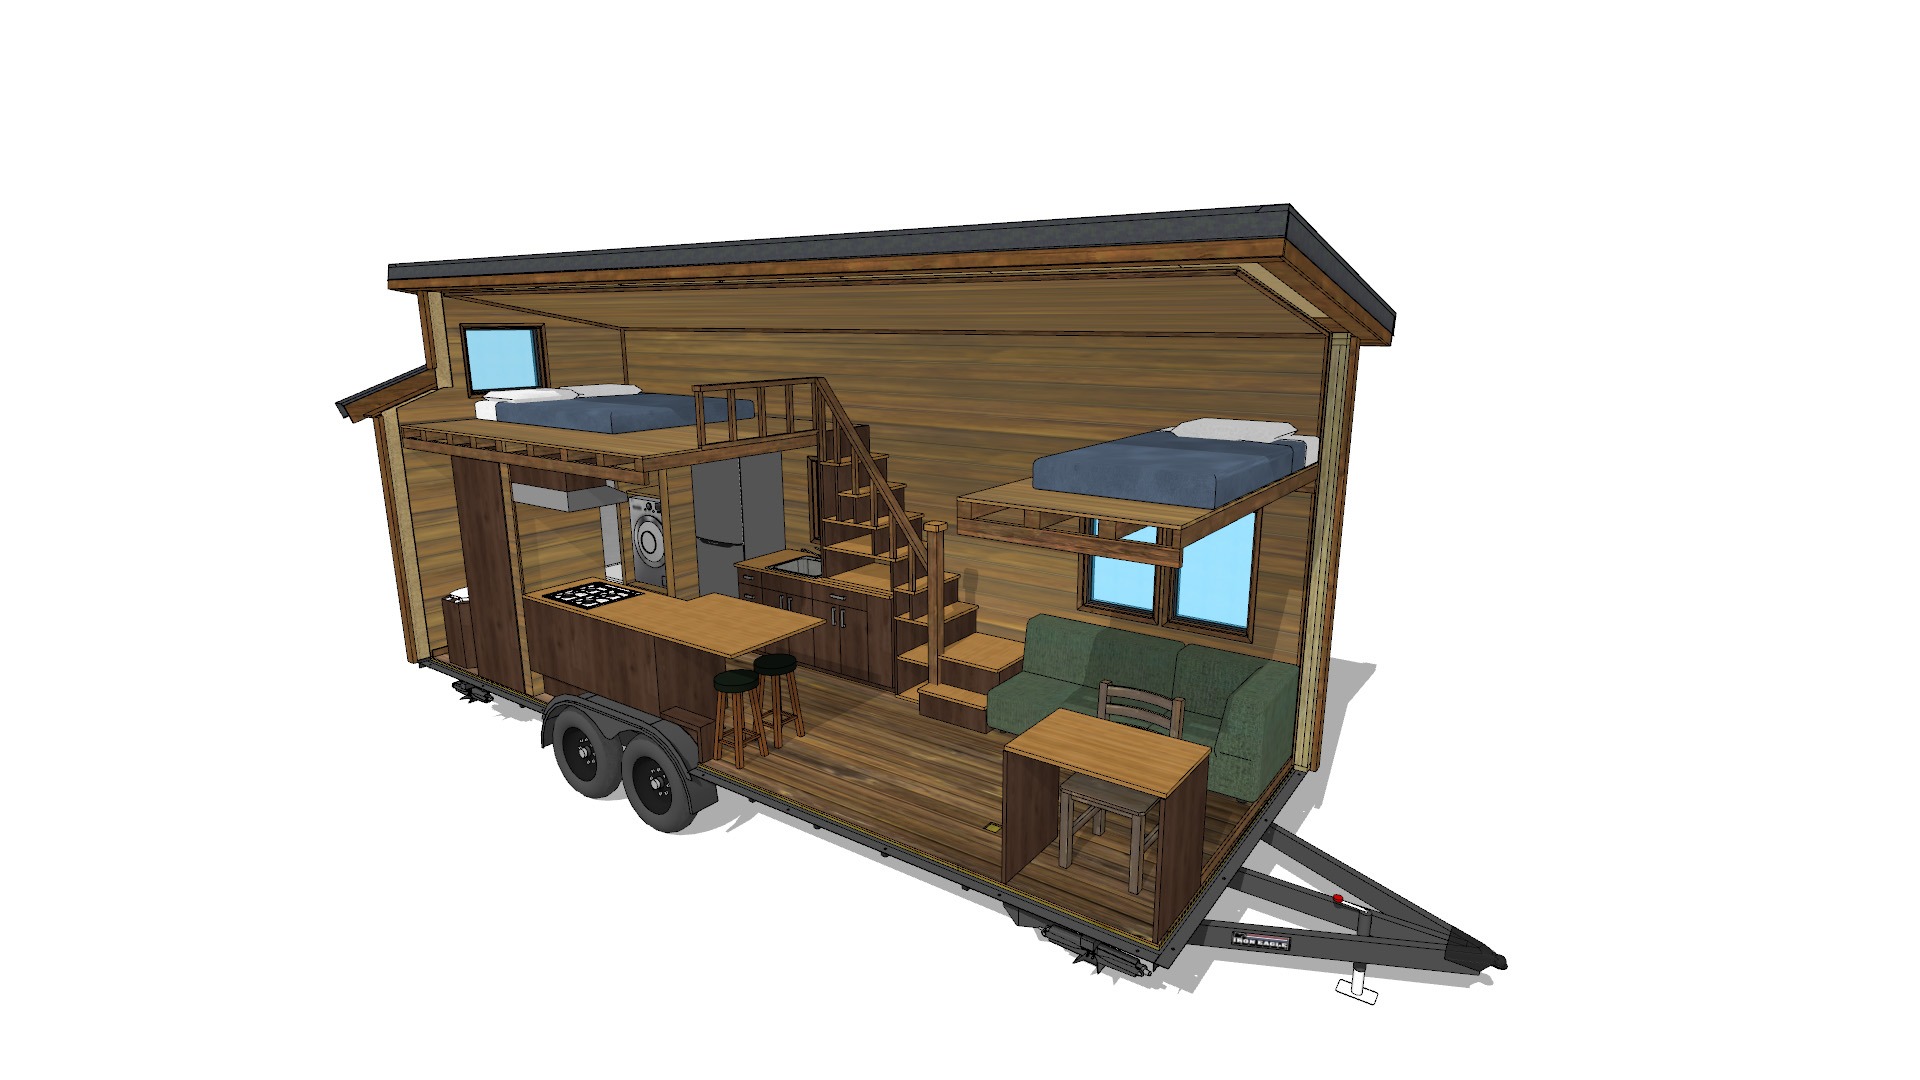 Design A Tiny House On Wheels Tips And Tools For Diyers,1st Anniversary Ideas